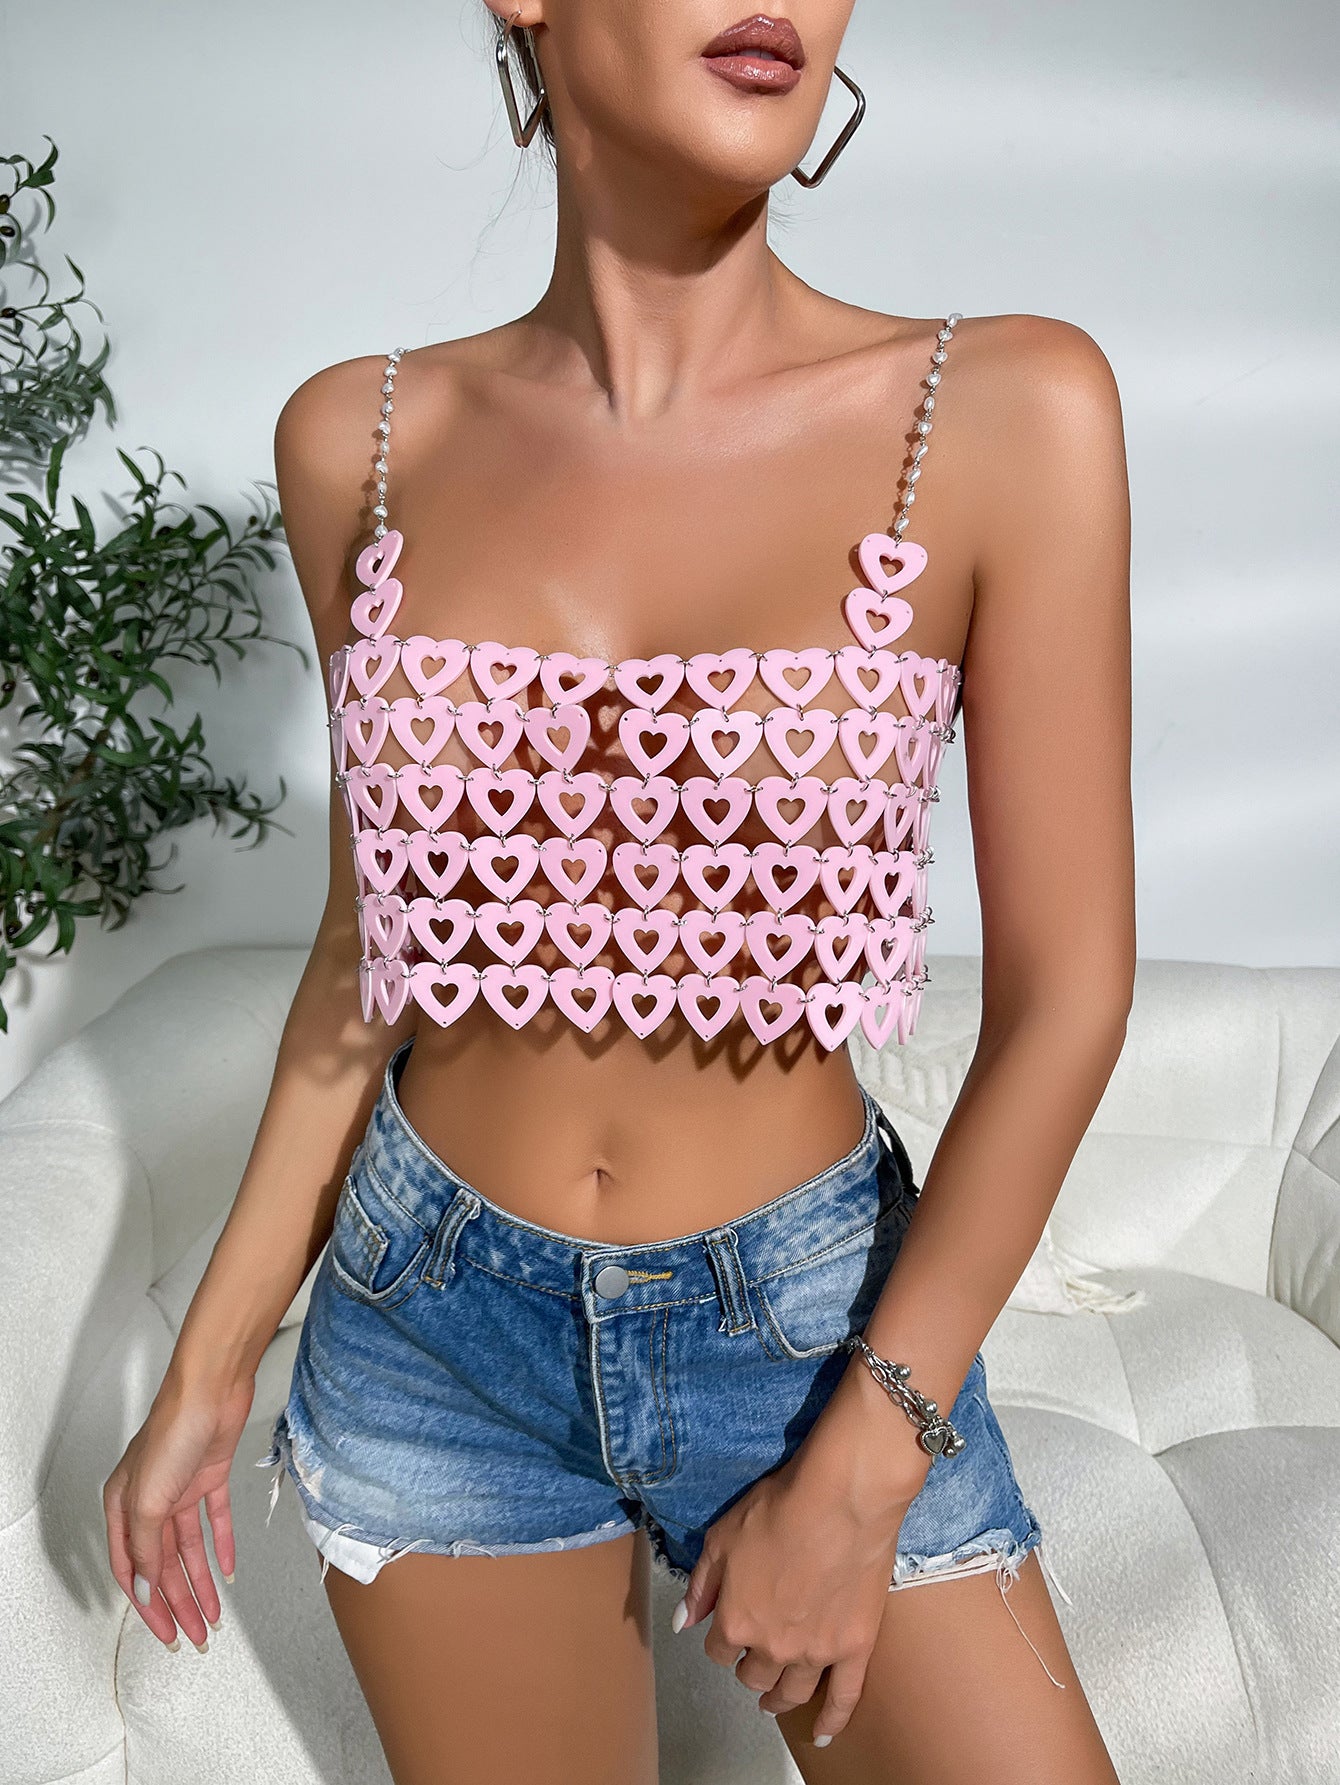 Candy Hearts- the Pink Heart Links Backless Top